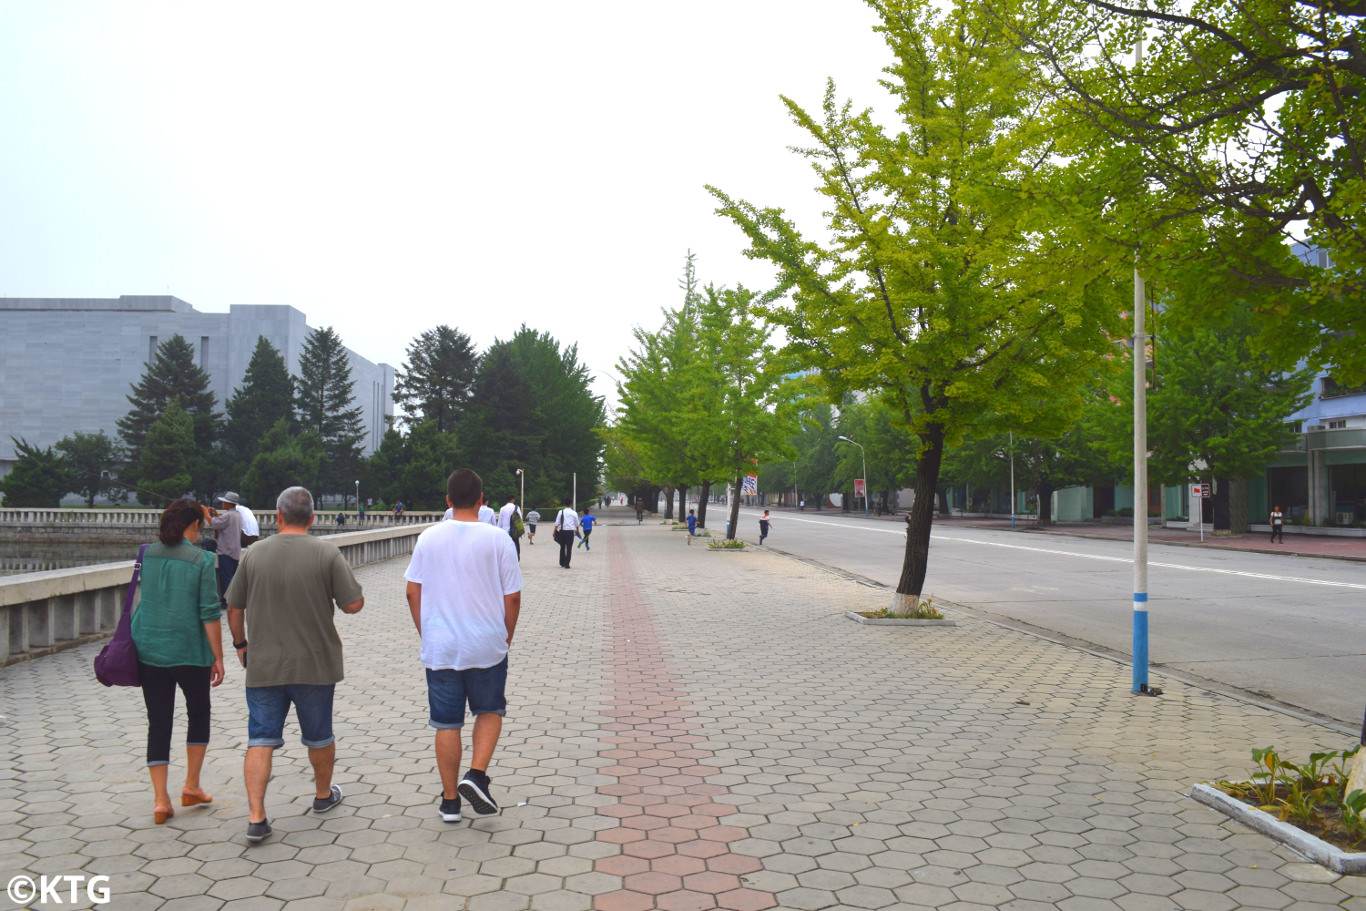 KTG travellers going for a walk outside the Songdowon Hotel in Wonsan city, Kangwon province, North Korea (DPRK). Trip arranged by KTG Tours